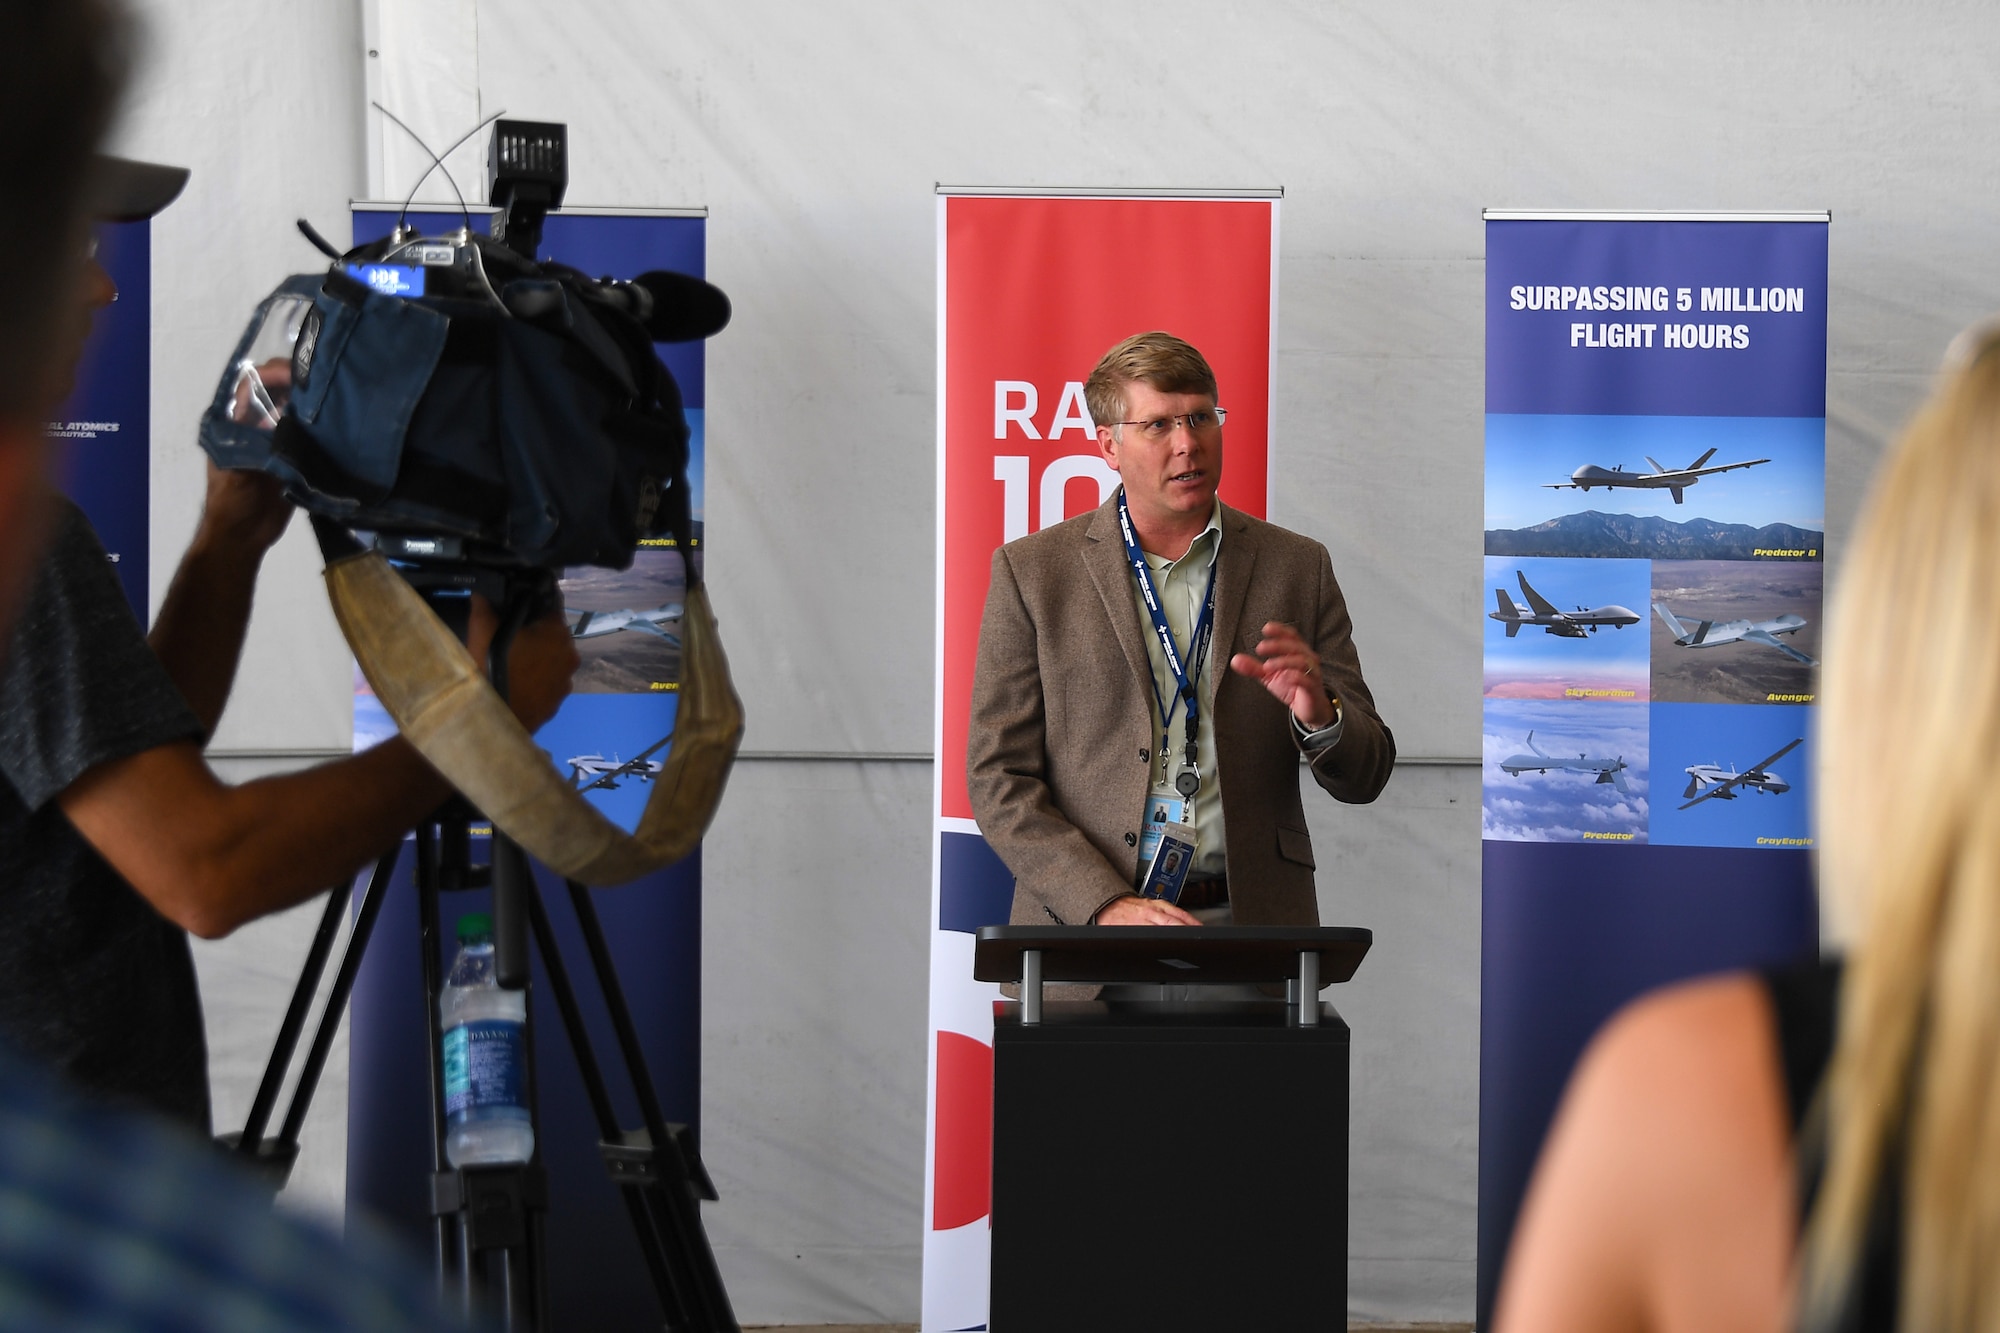 Eric Johnson, General Atomics Aeronautical Systems program manager, thanks a crowd of community leaders and guests in attendance at the launch of an MQ-9B SkyGuardian from Grand Sky Air Park July 10, 2018, on Grand Forks Air Force Base, North Dakota. The launch marks the first trans-Atlantic flight for a high-altitude, long-endurance remotely-piloted aircraft. (U.S. Air Force photo by Airman 1st Class Elora J. Martinez)